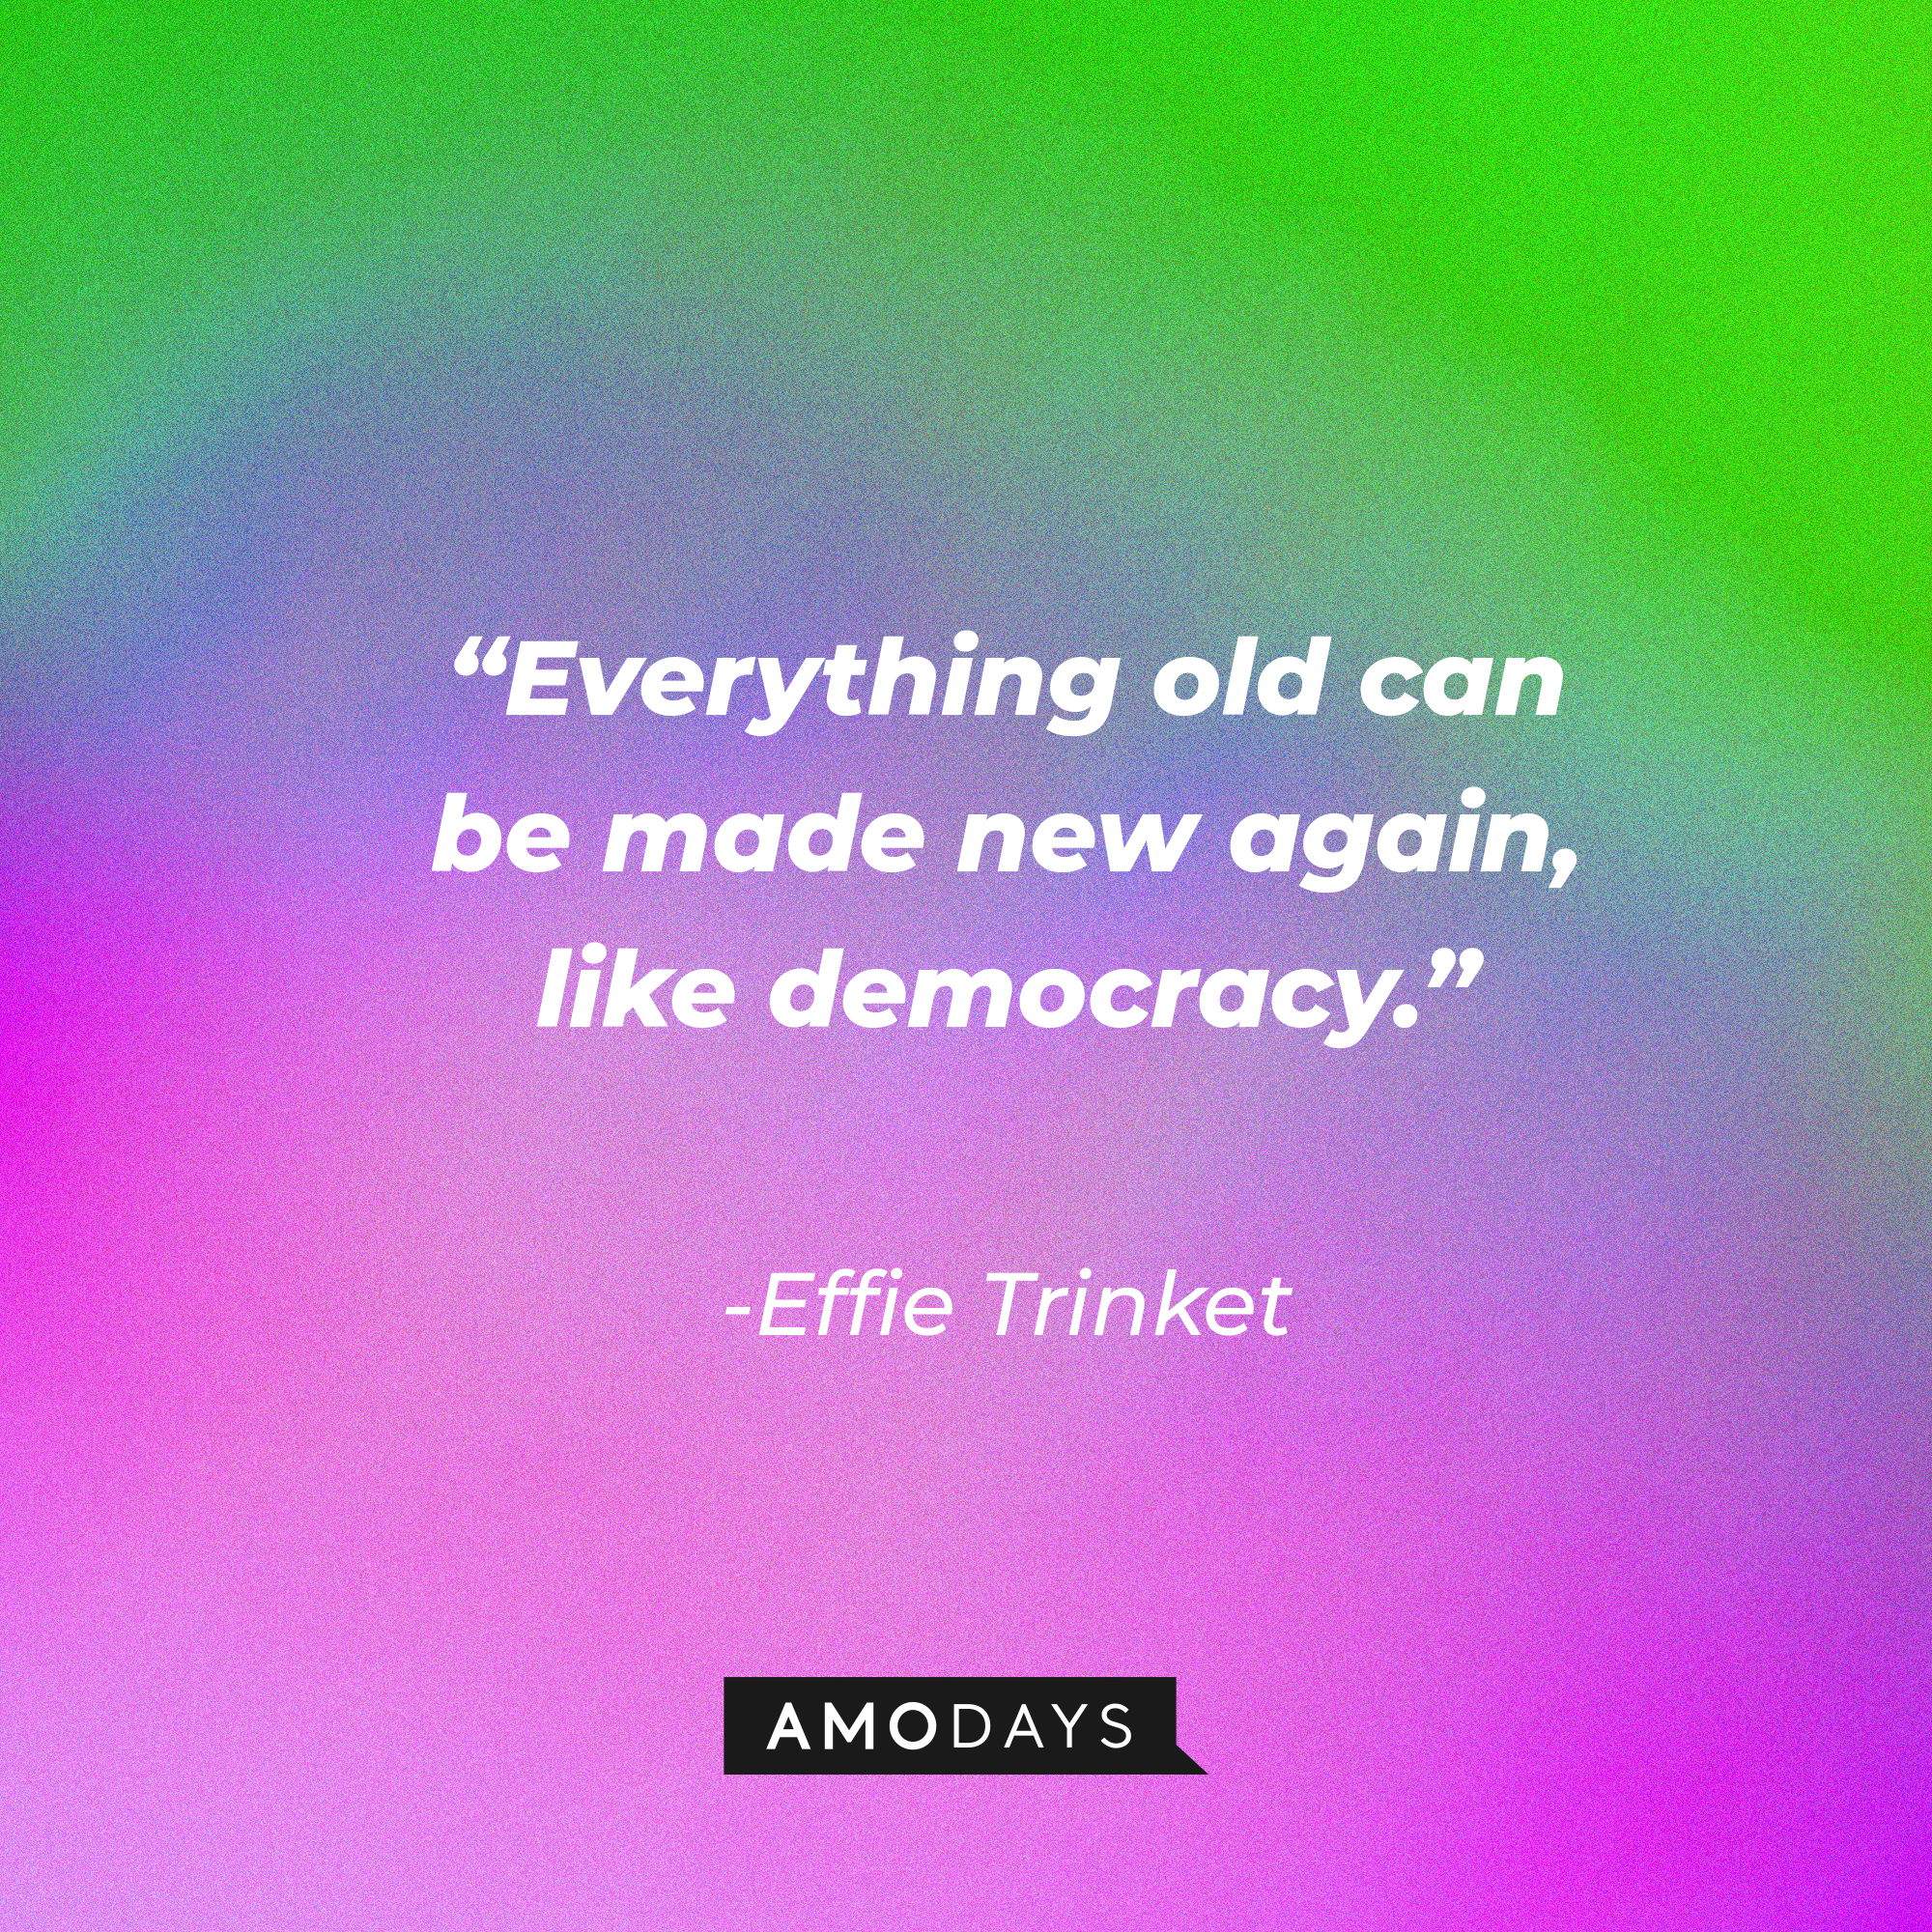 Effie Trinket's quote: “Everything old can be made new again, like democracy.” | Source: AmoDays